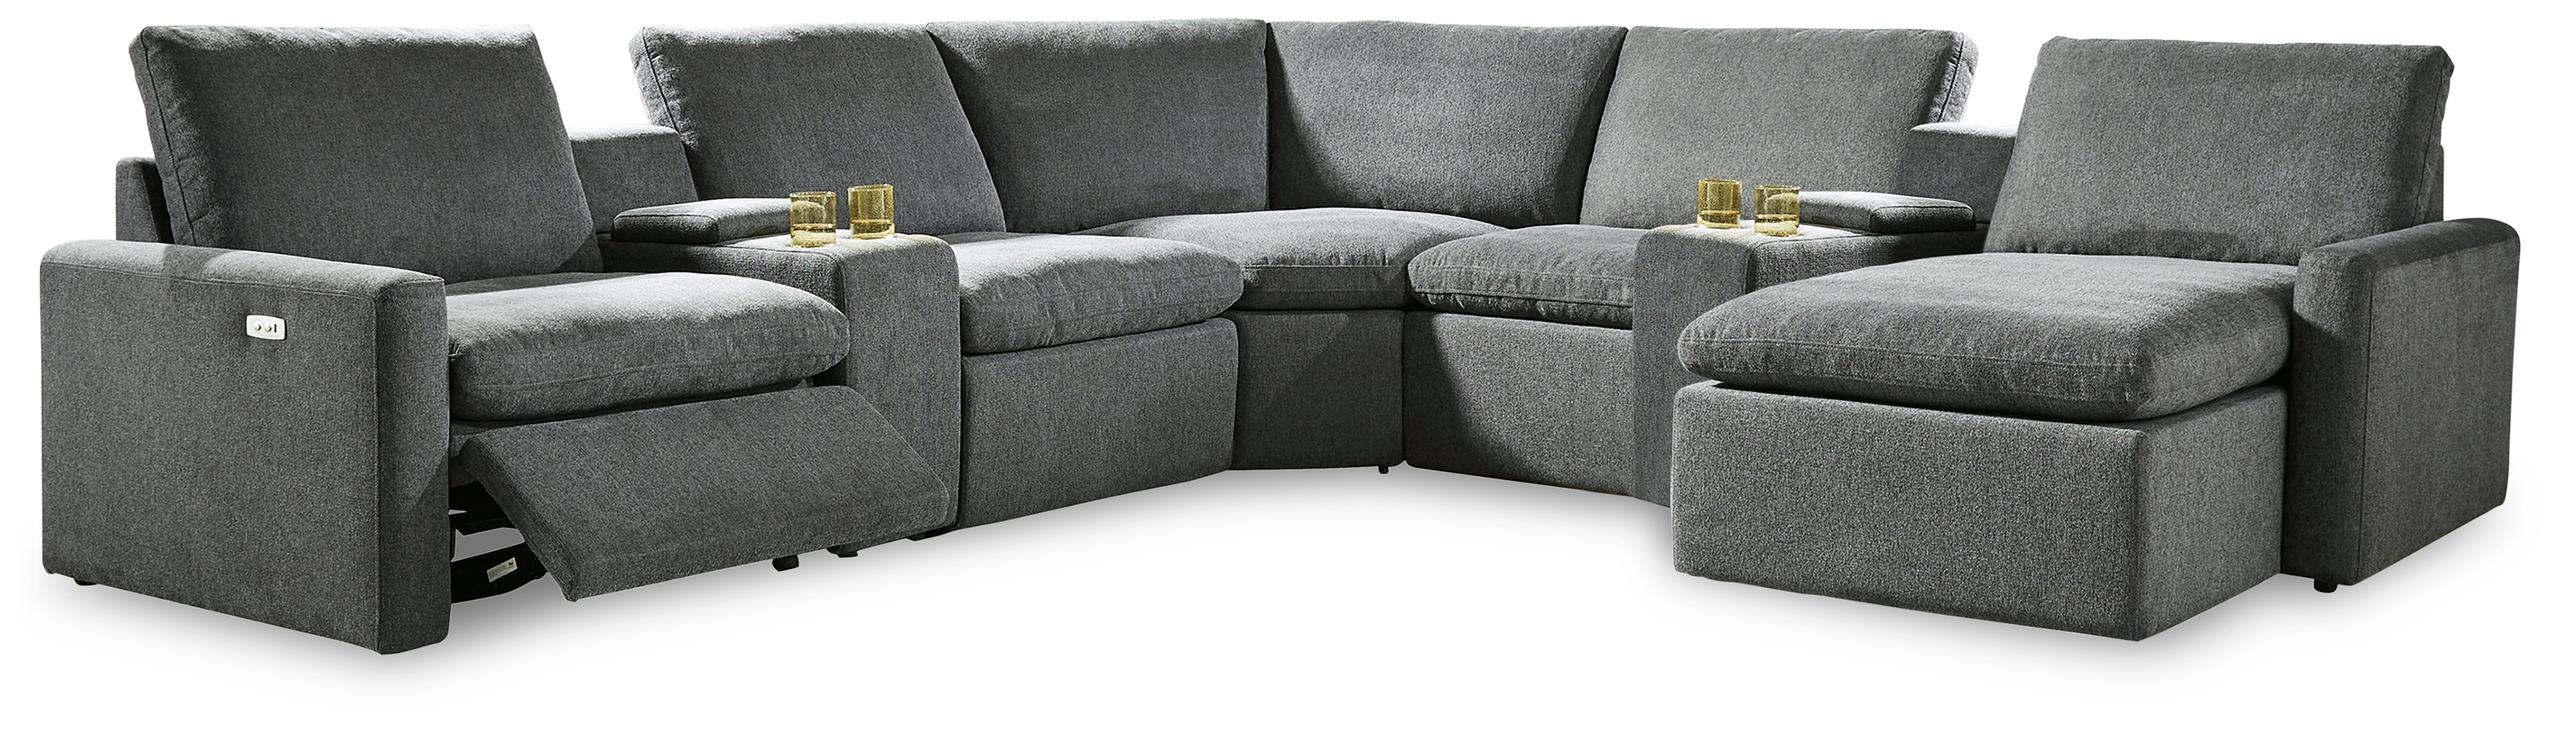 ASHLEY FURNITURE 60508S12 Hartsdale 7-piece Power Reclining Sectional